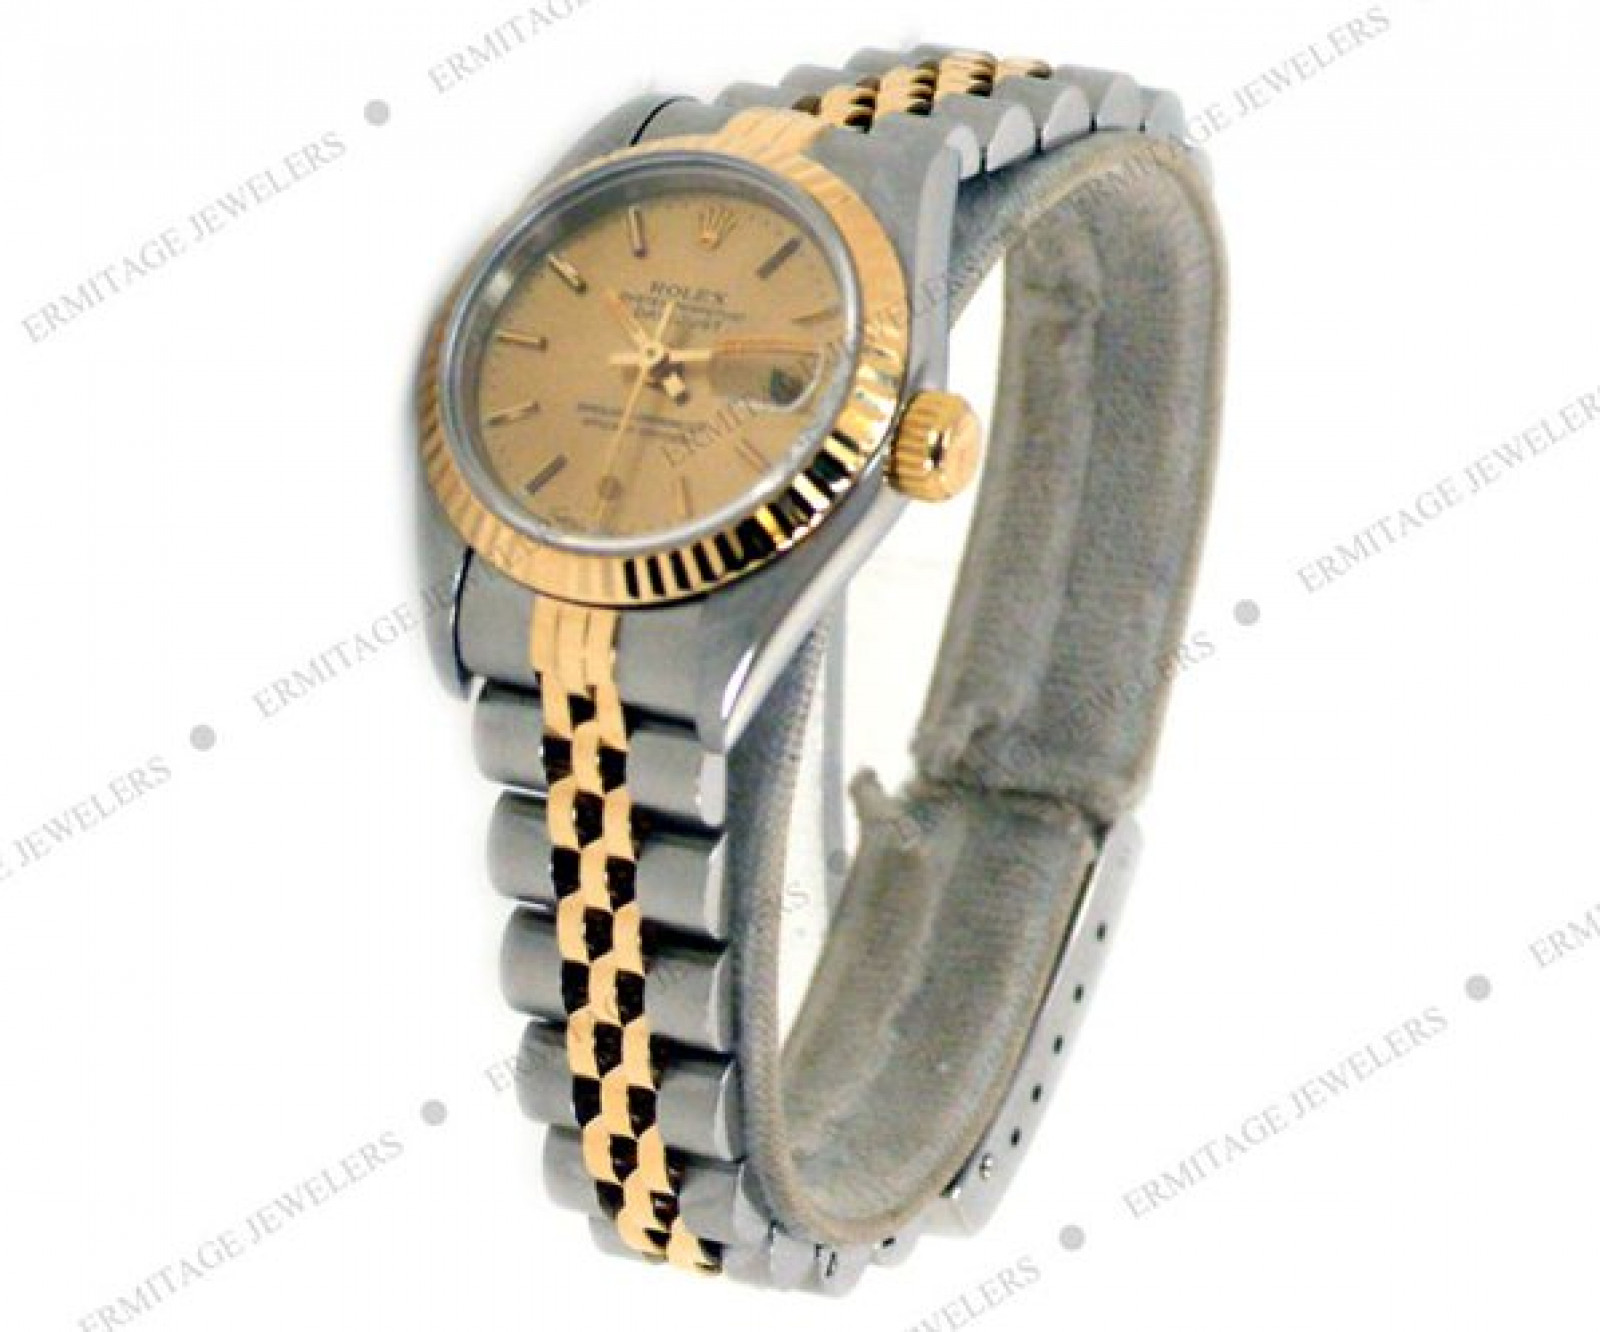 Pre-Owned Gold & Steel Rolex Datejust 69173 Year 1994